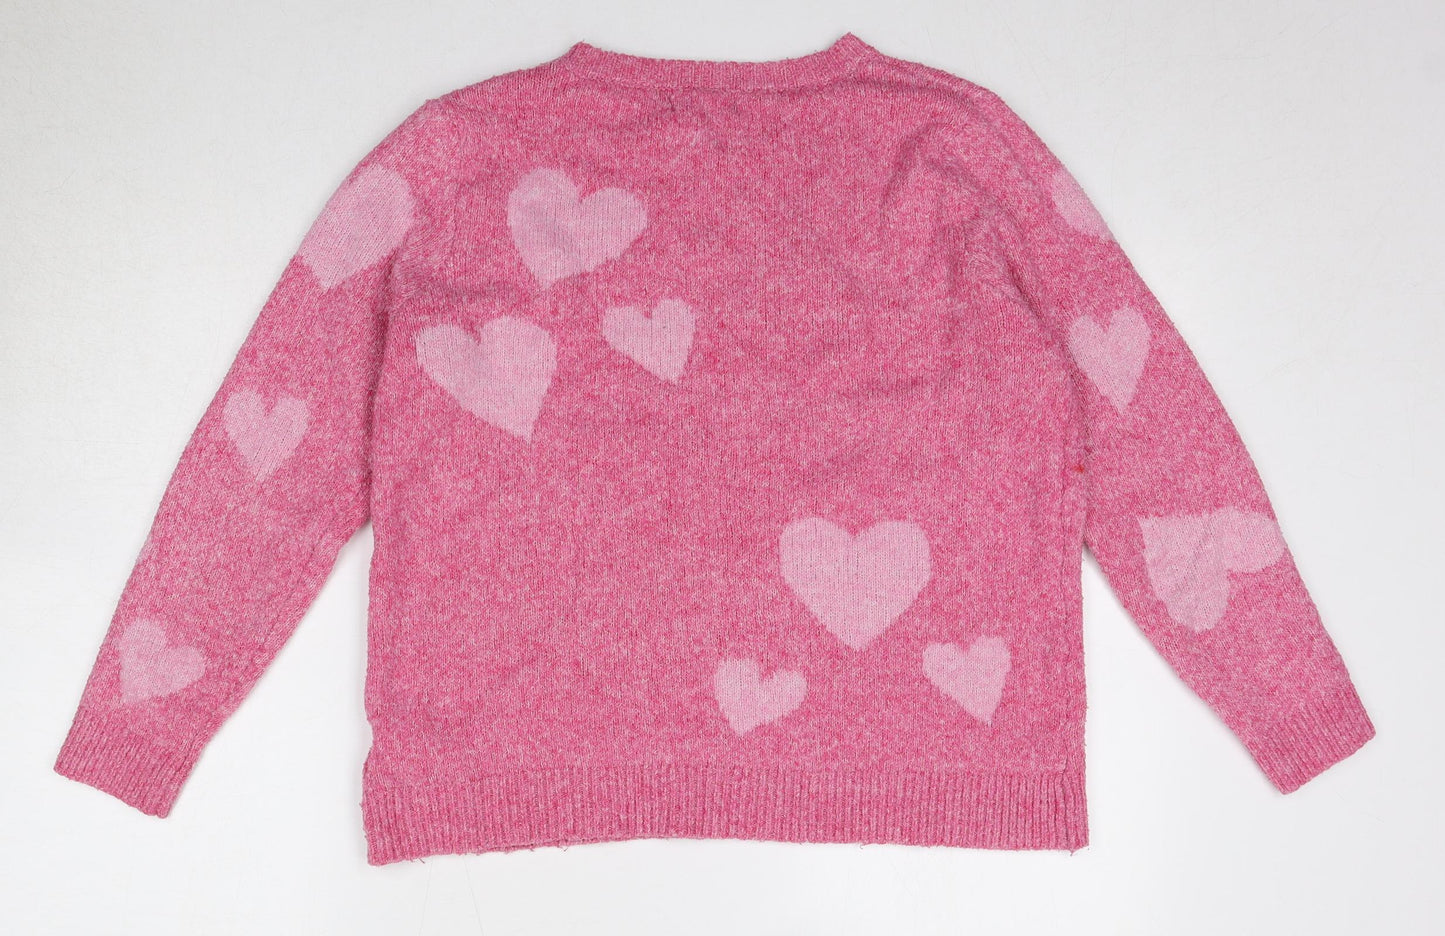 Cupcakes and Cashmere Womens Pink Round Neck Geometric Polyester Pullover Jumper Size L - Heart Pattern